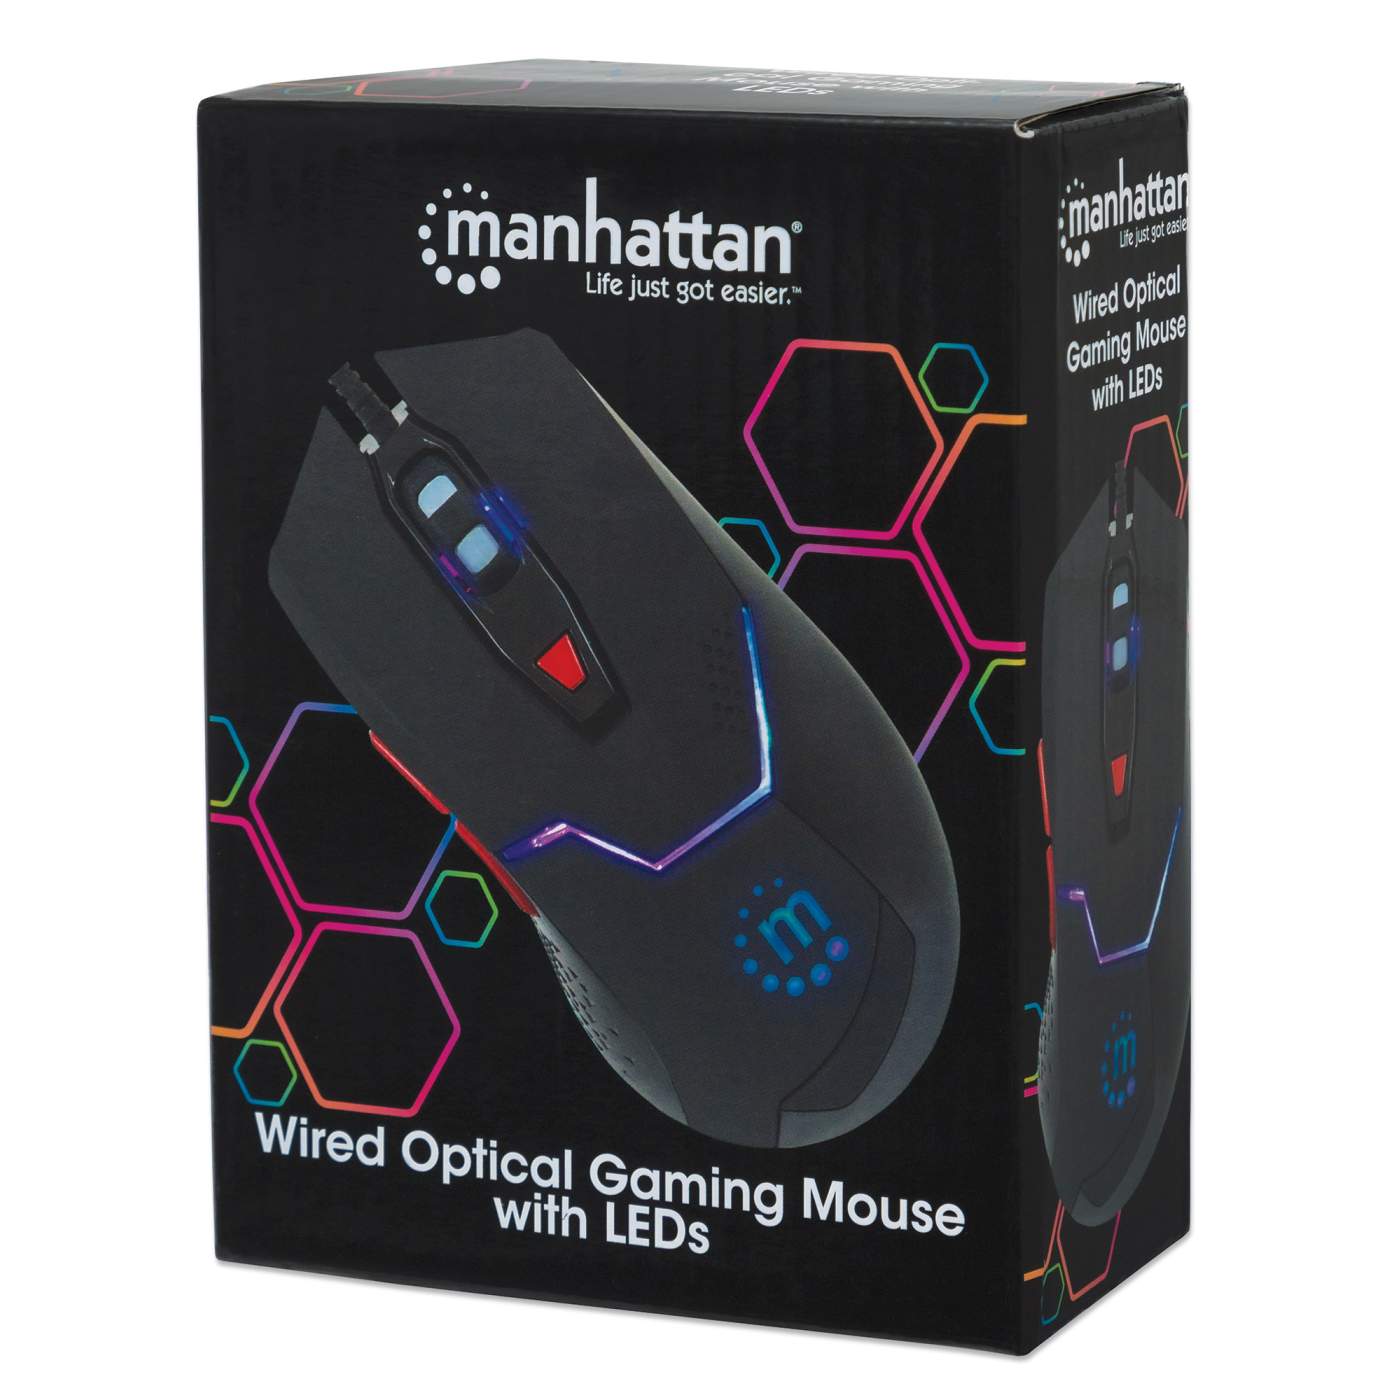 Wired Optical Gaming Mouse with LEDs Packaging Image 2